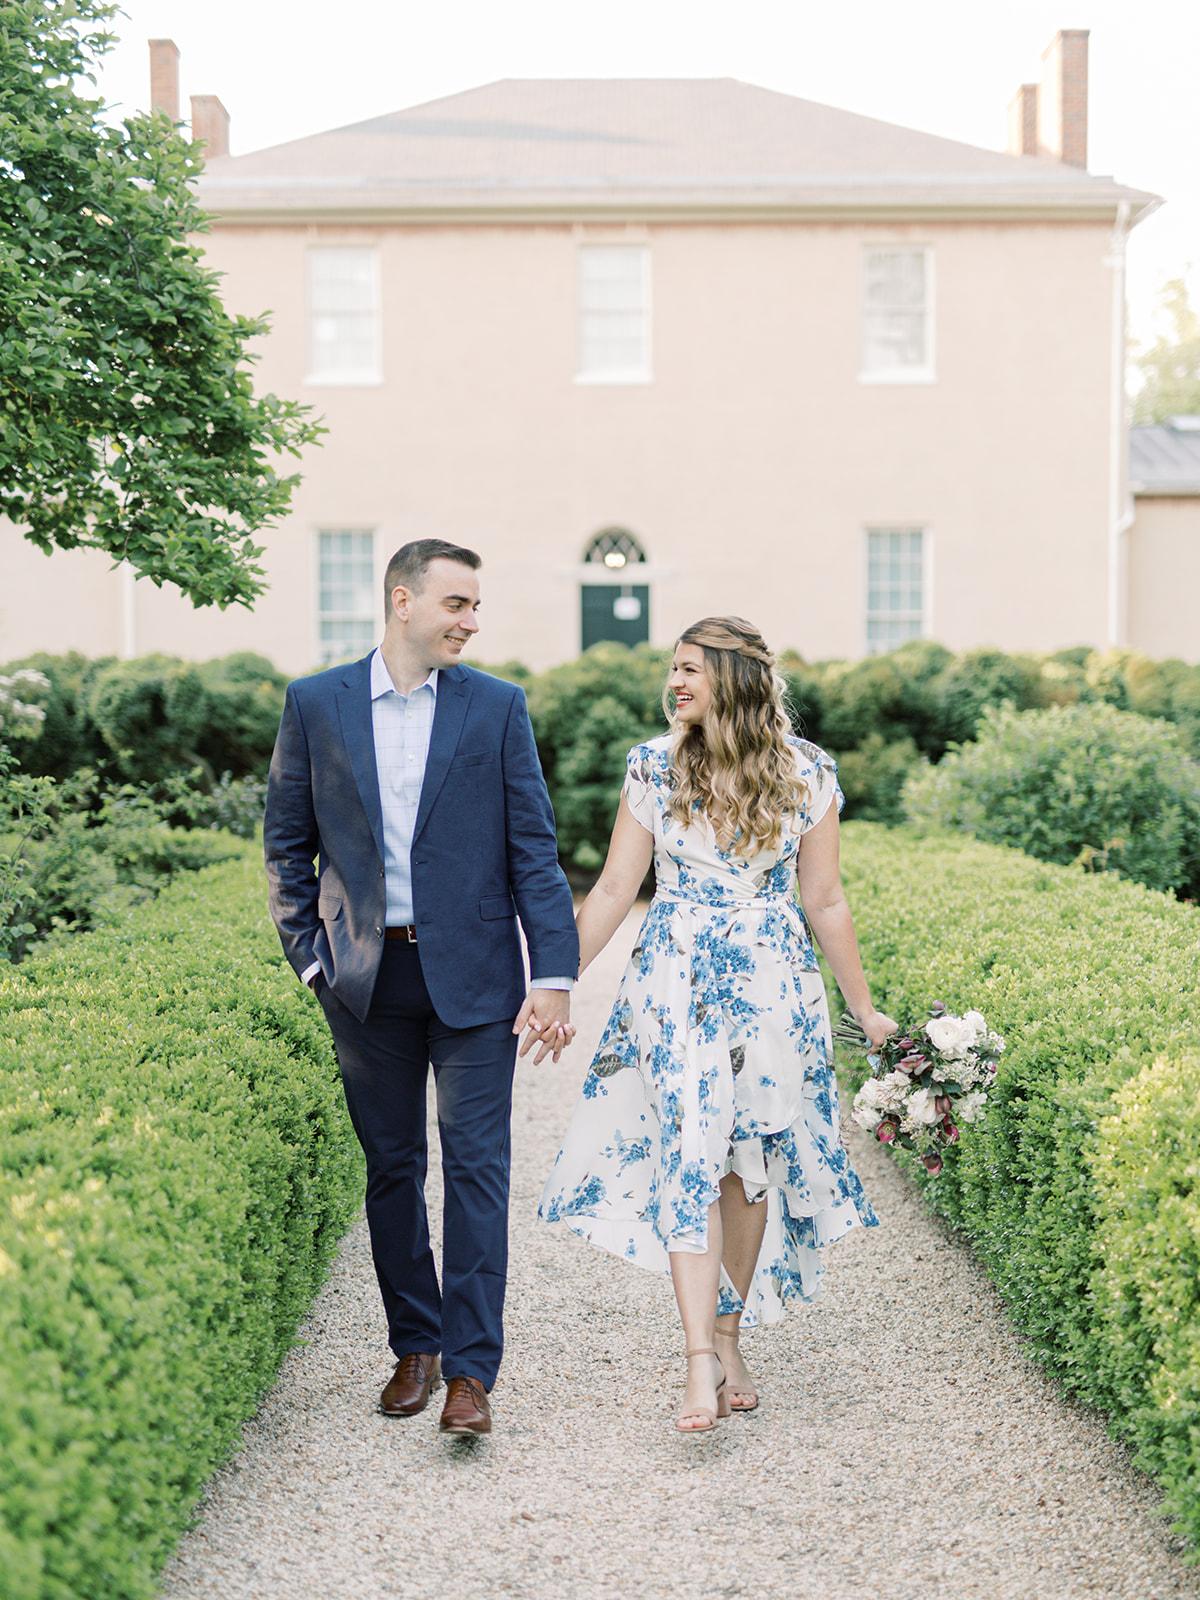 The Wedding Website of Meaghan Soel and Alex Martin